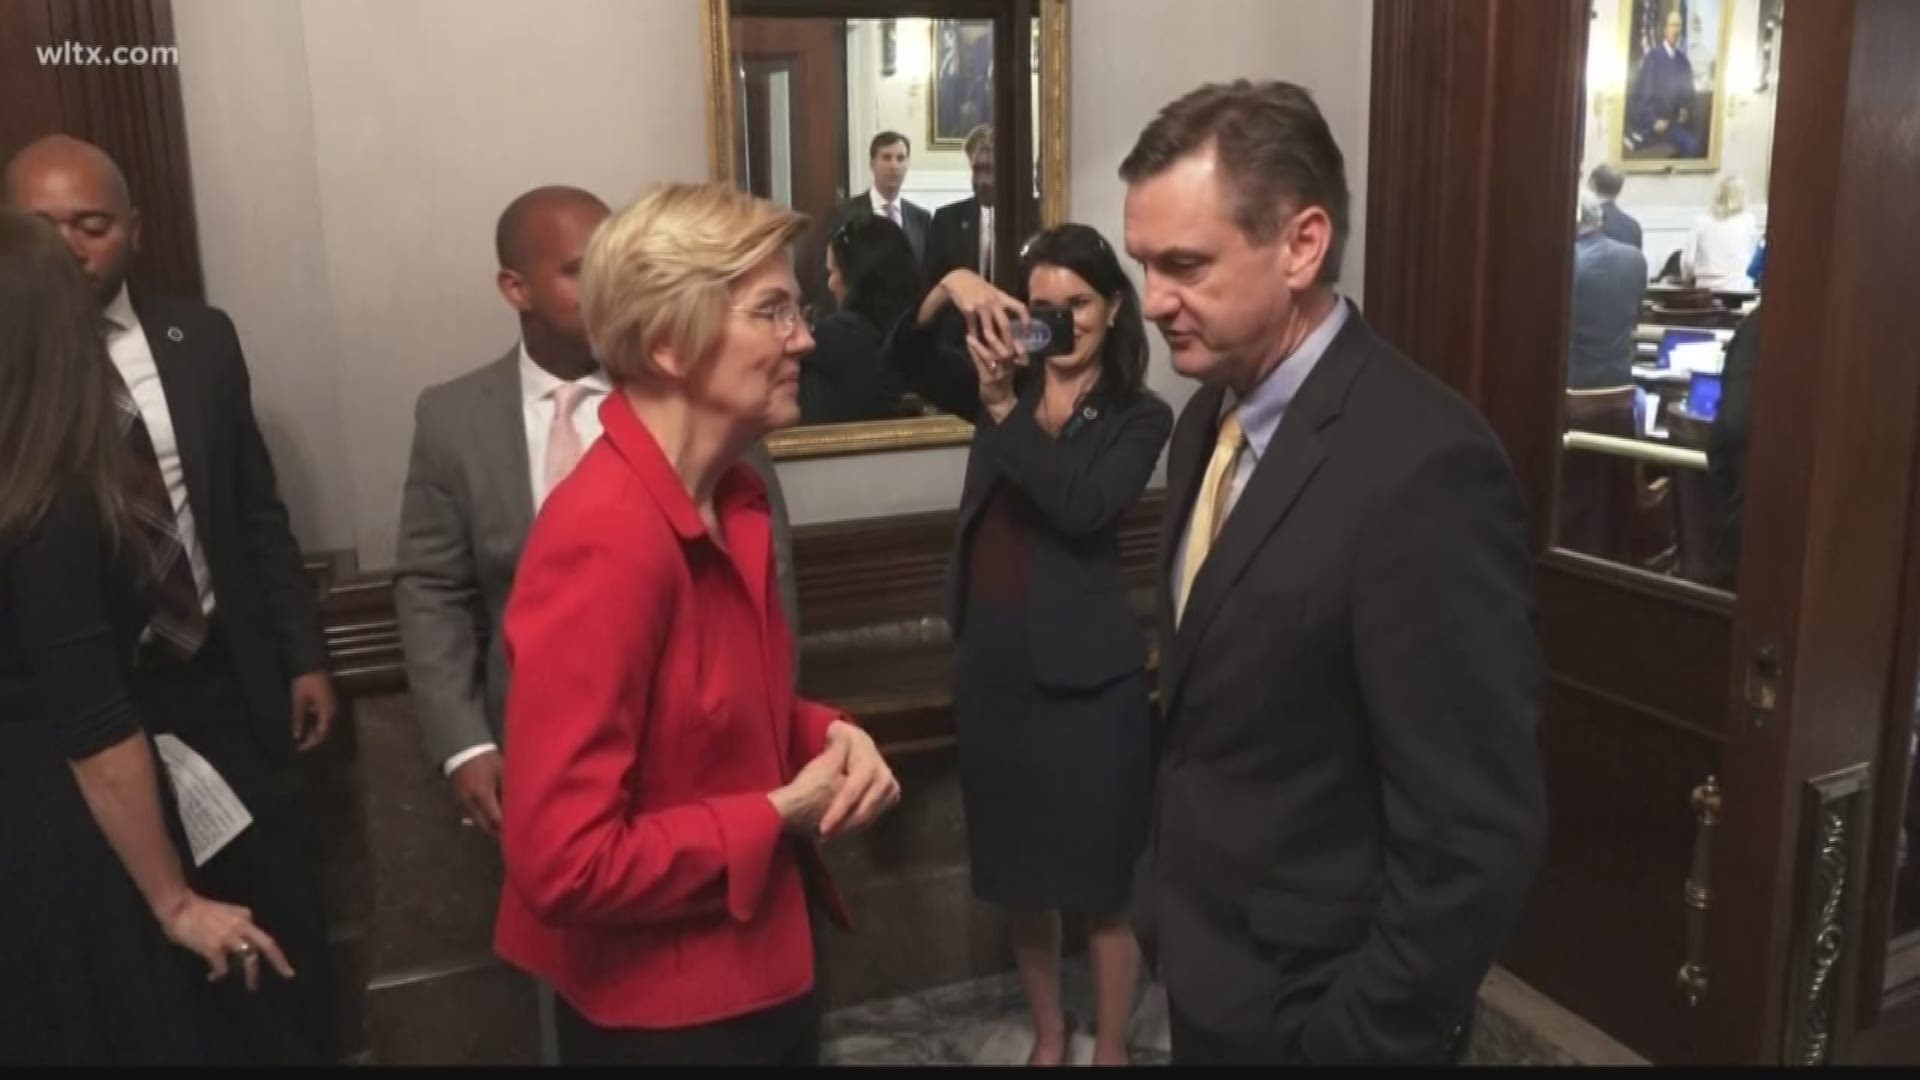 Democratic presidential hopeful Elizabeth Warren was at the state house today.
The Massachusetts senator spent a few minutes on the floor taking pictures and speaking with state lawmakers.